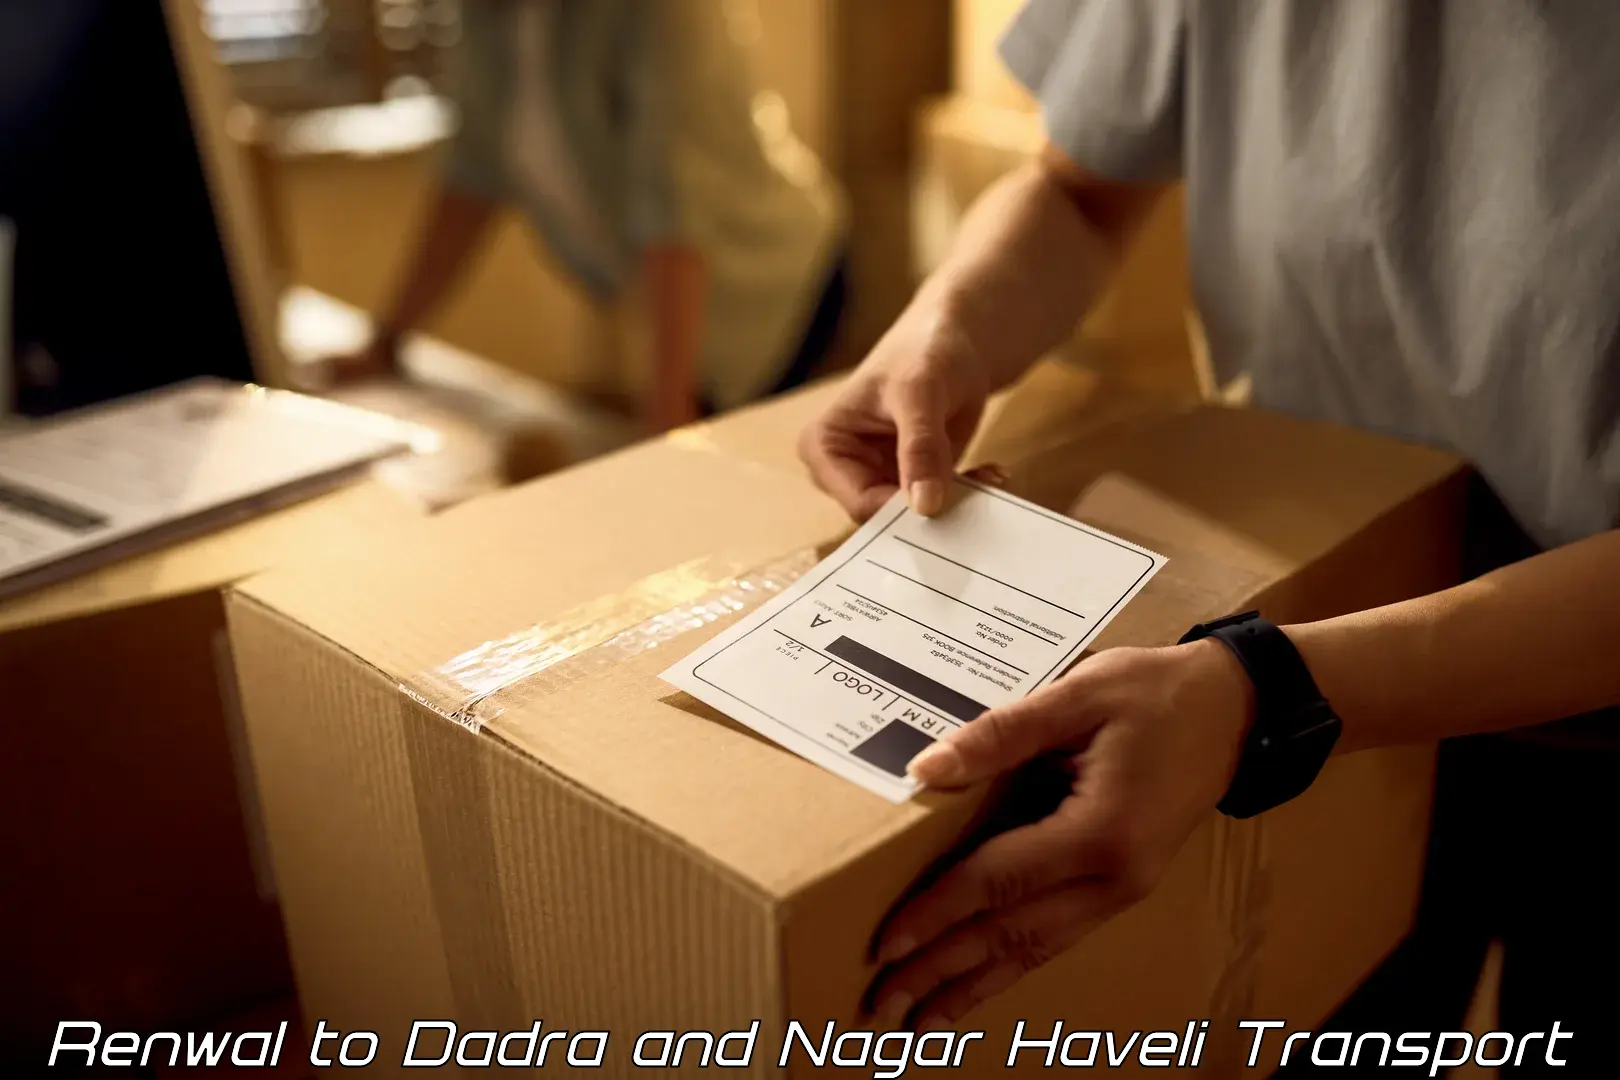 Container transportation services Renwal to Dadra and Nagar Haveli